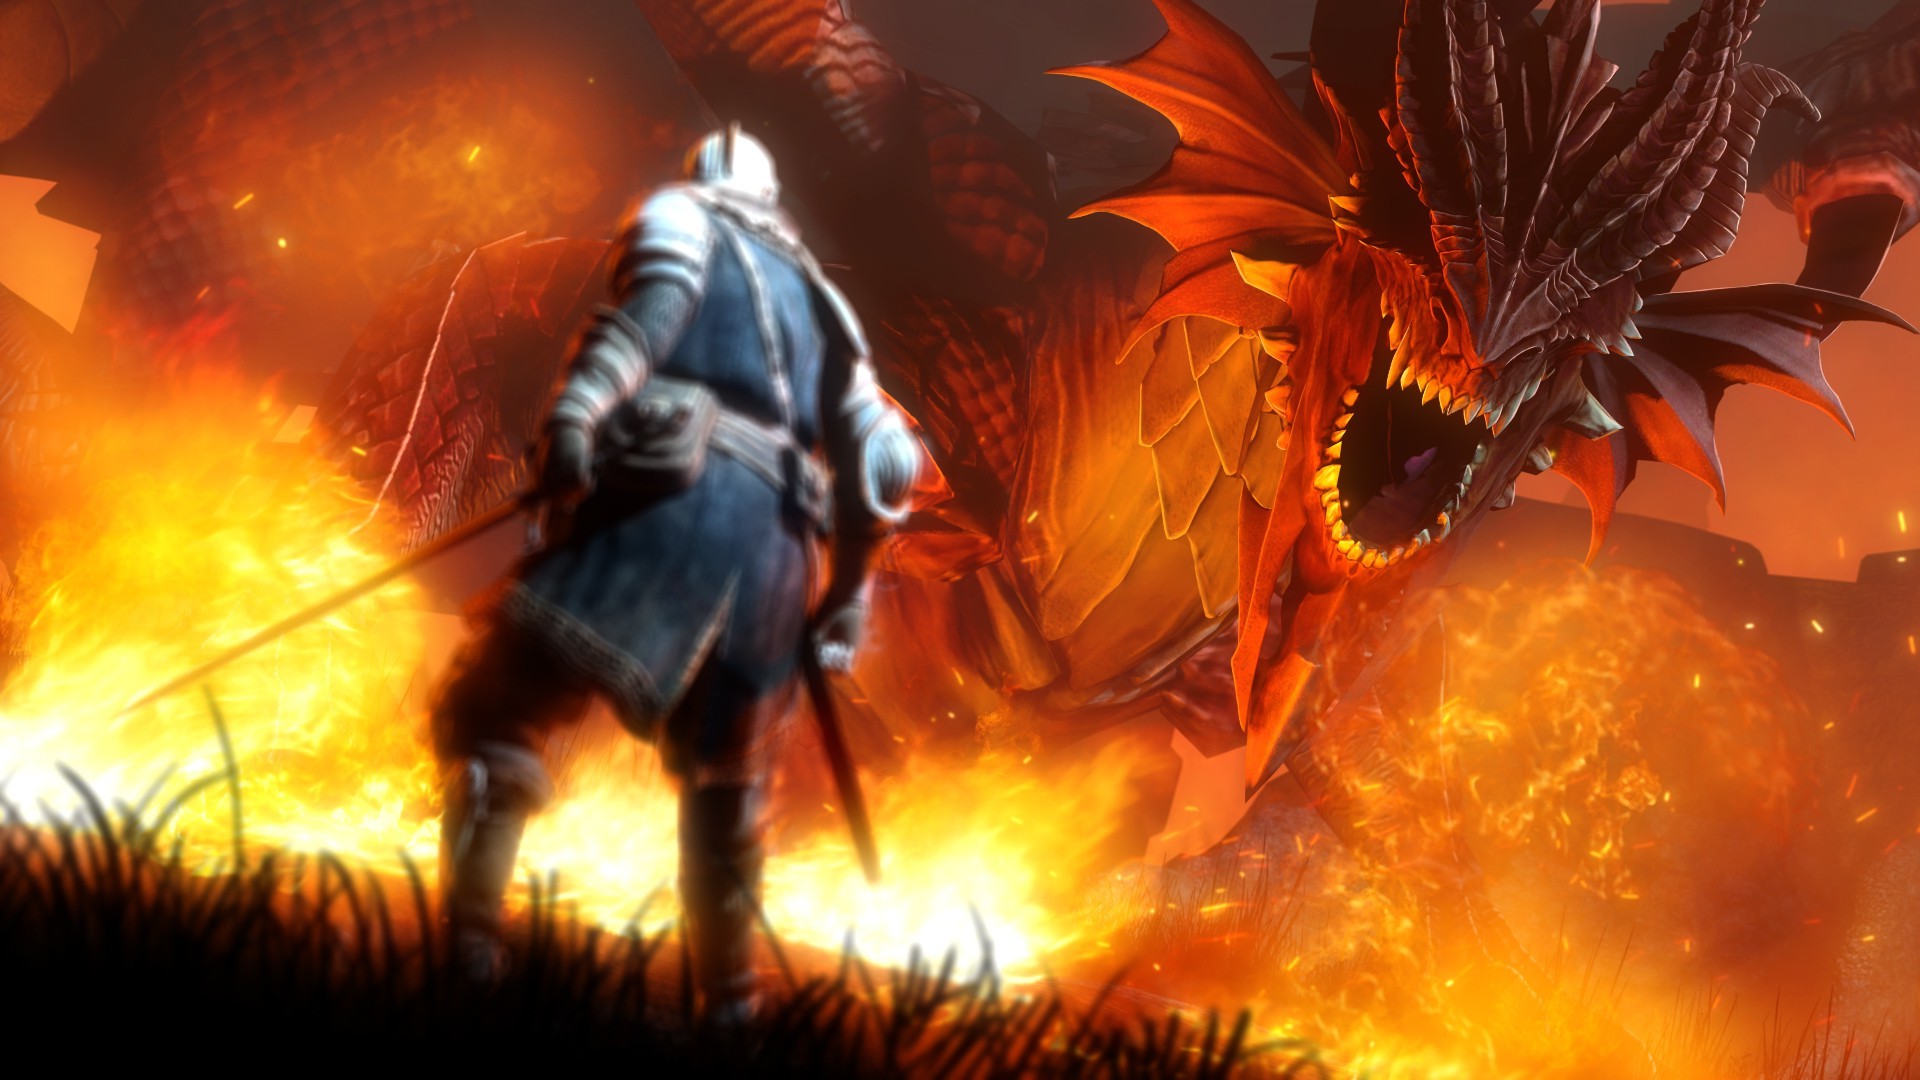 1920x1080 ... Download Fire Dragon Wallpapers Background For Free Wallpaper